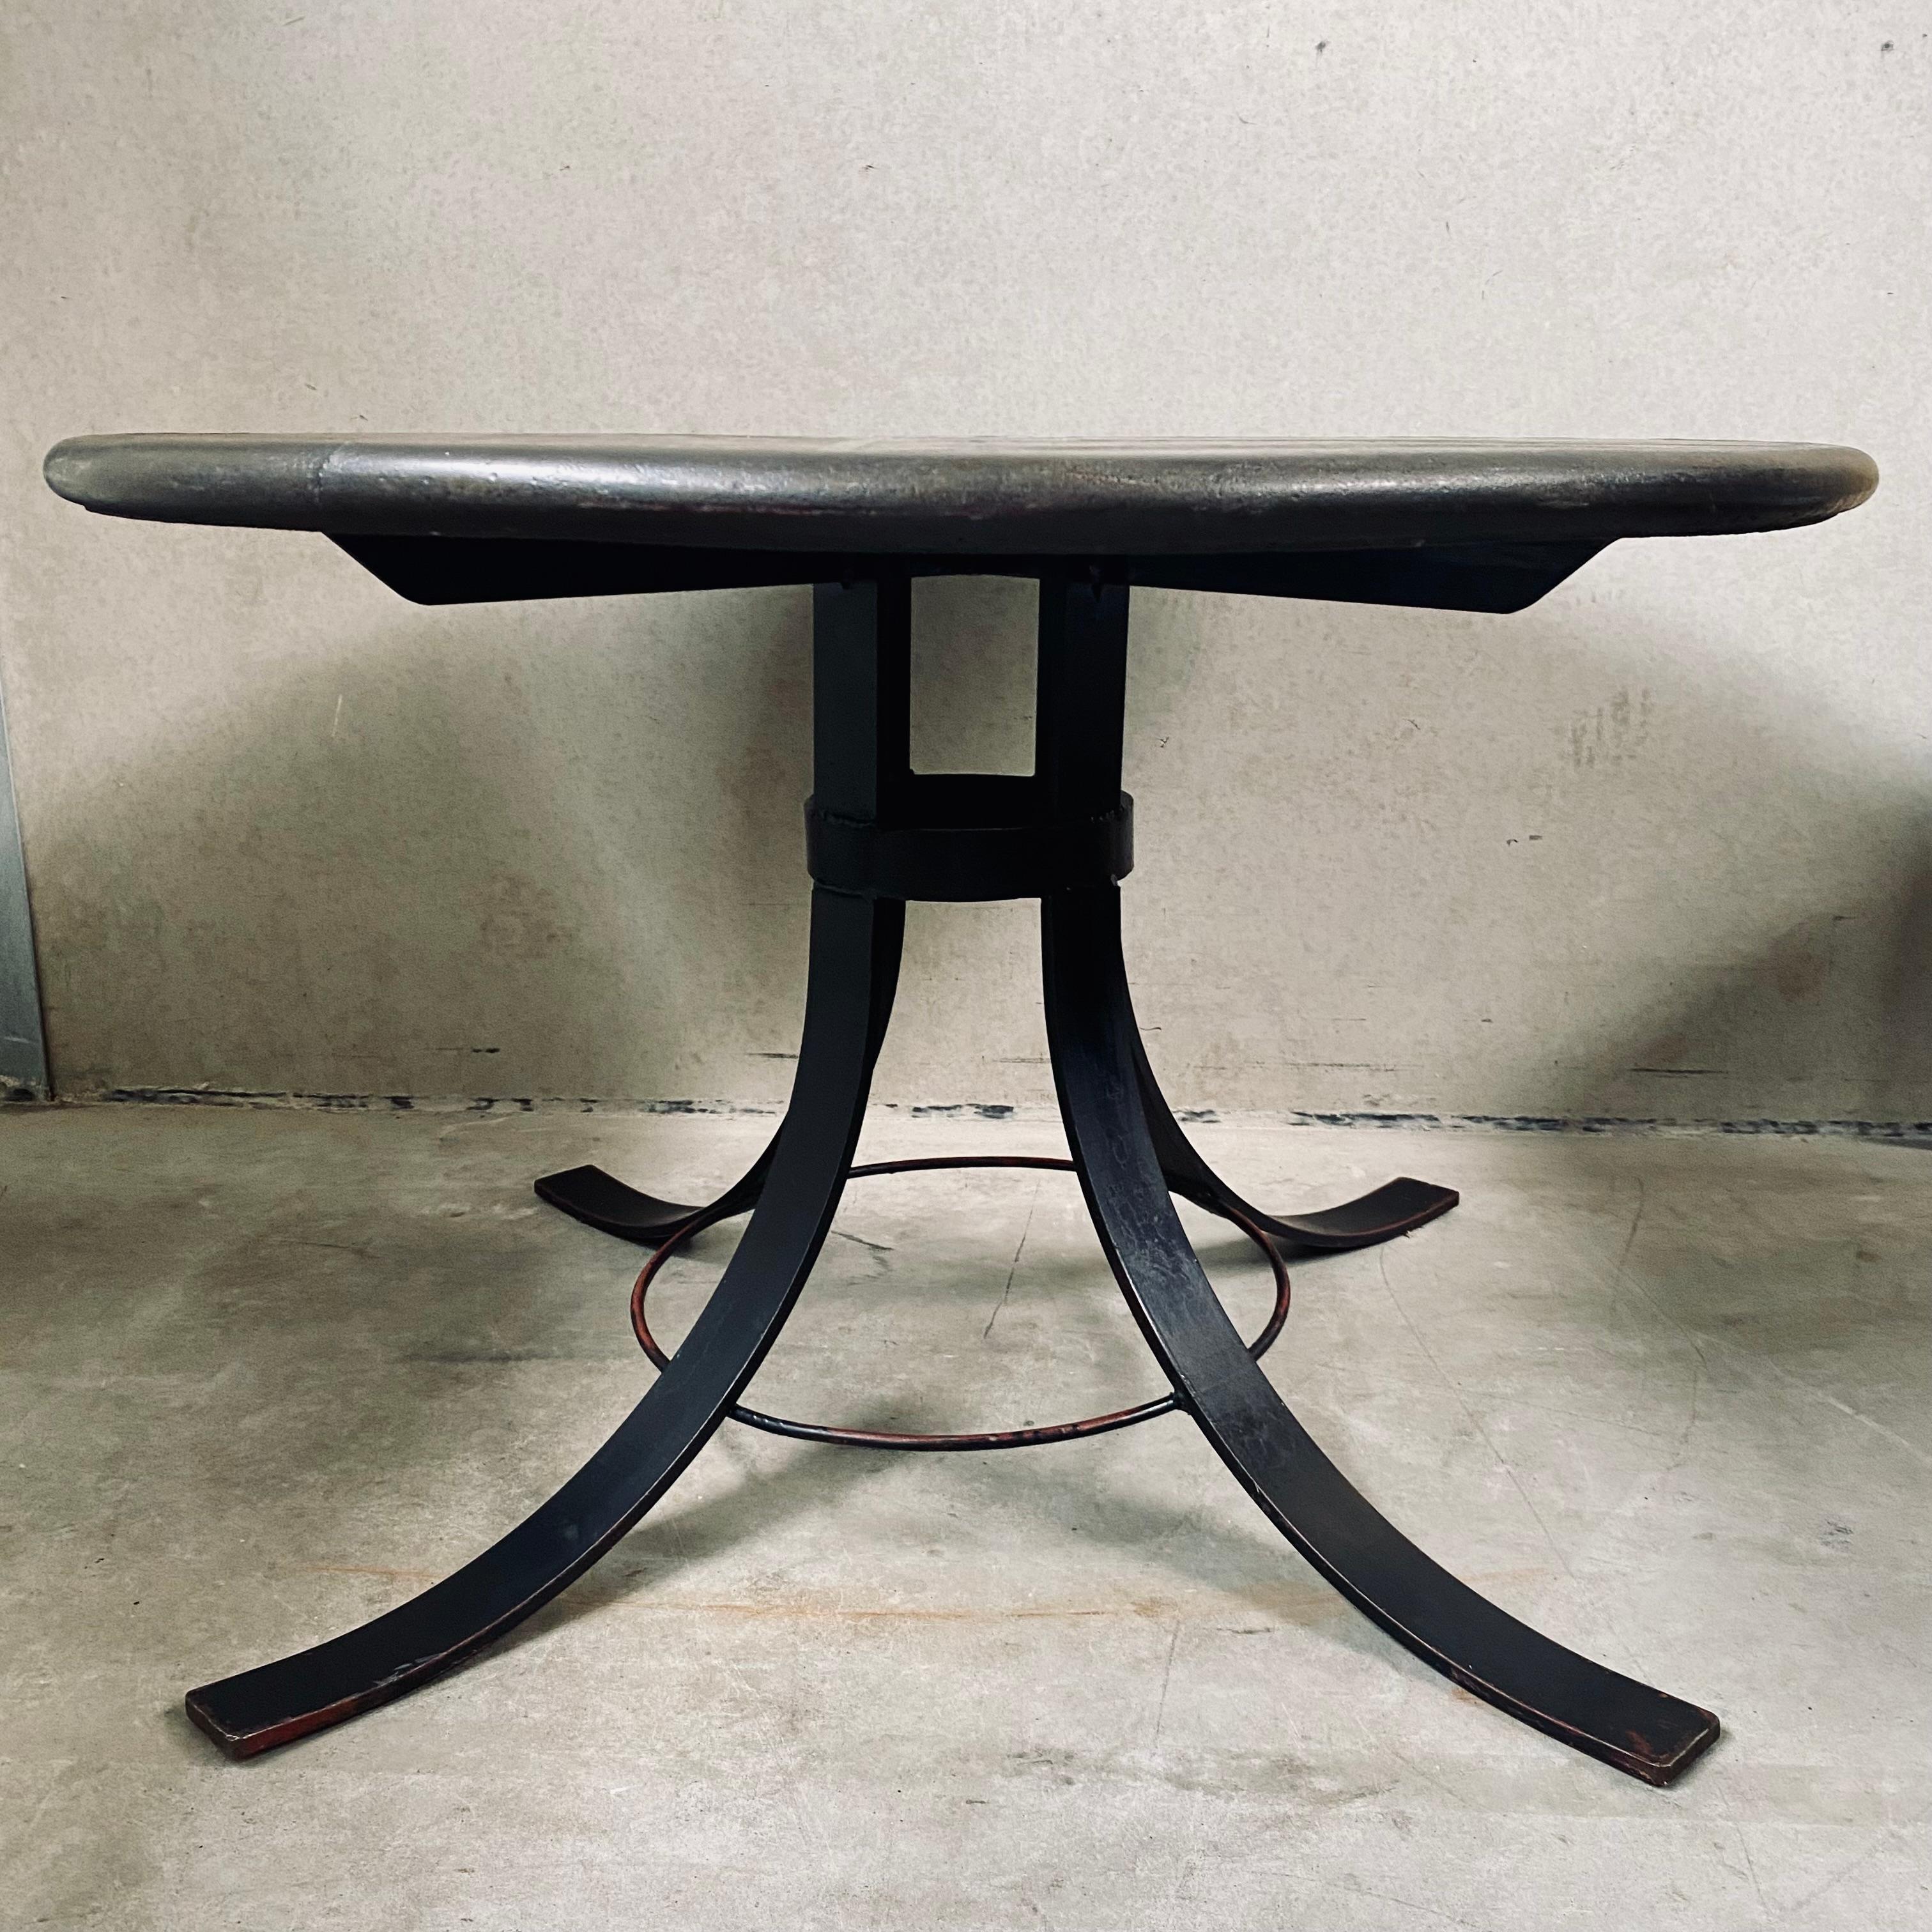 Dutch Brutalist Art Round Dining Table With Cast Iron Base By Paul Kingma Agate 1980 For Sale